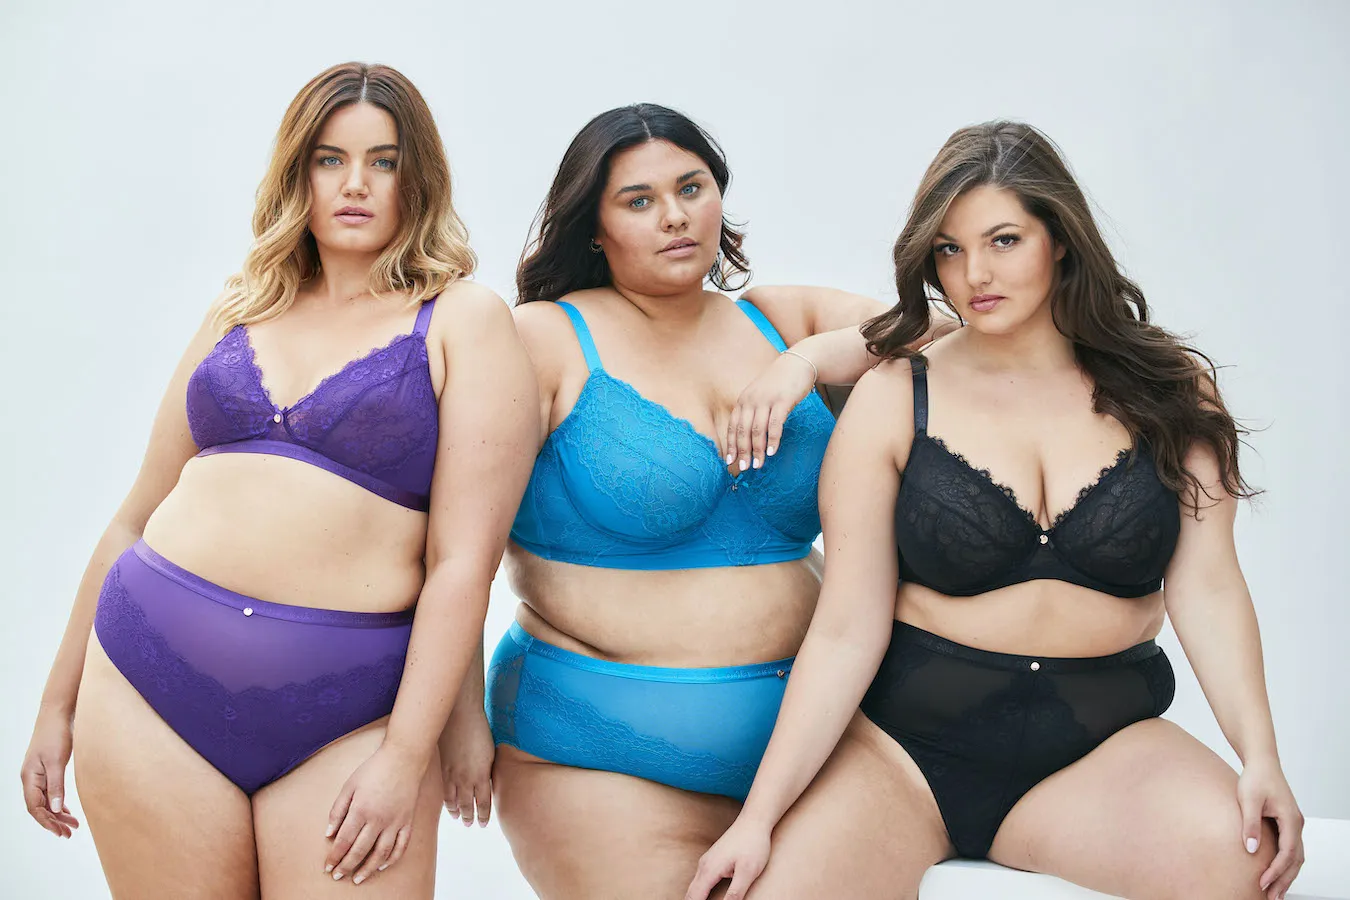 Access exclusive deals, coupons, offers and cashback on Discover the Sensual Comfort of Oola Lingerie through OODLZ courtesy of Oola Lingerie.